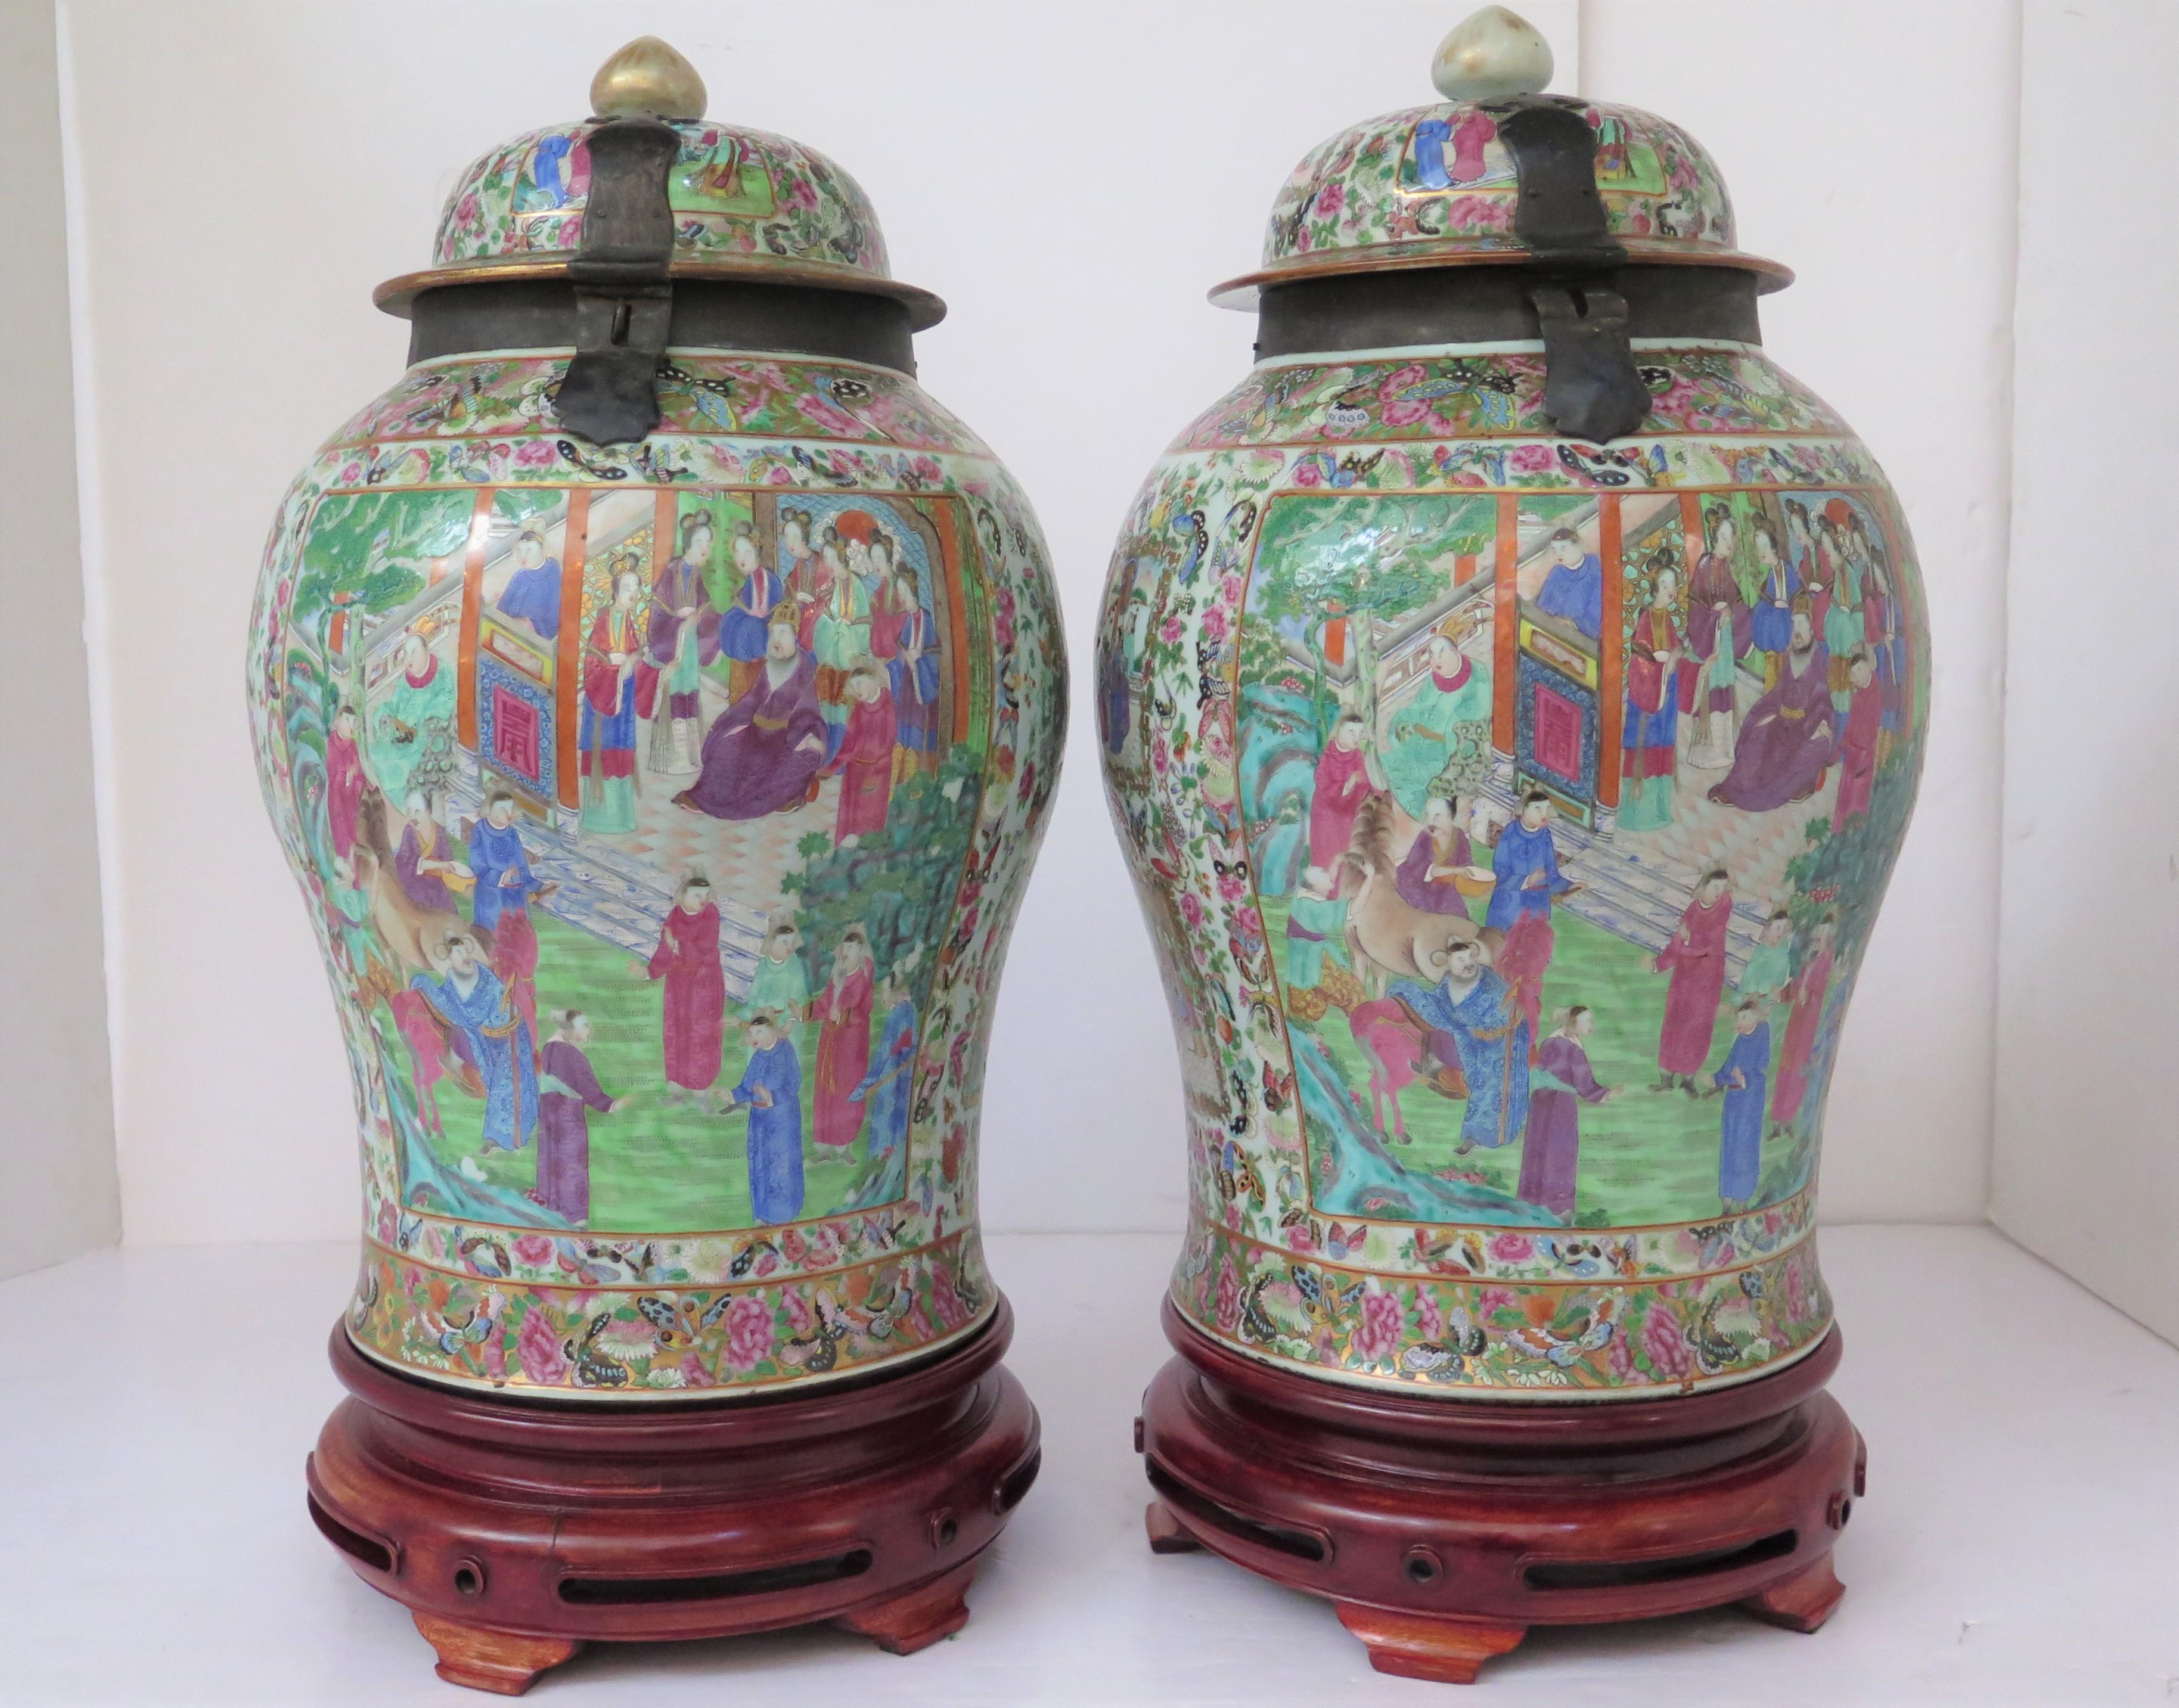 A Pair of Late 18th-Early 19th Century Chinese Lidded Jars  For Sale 9